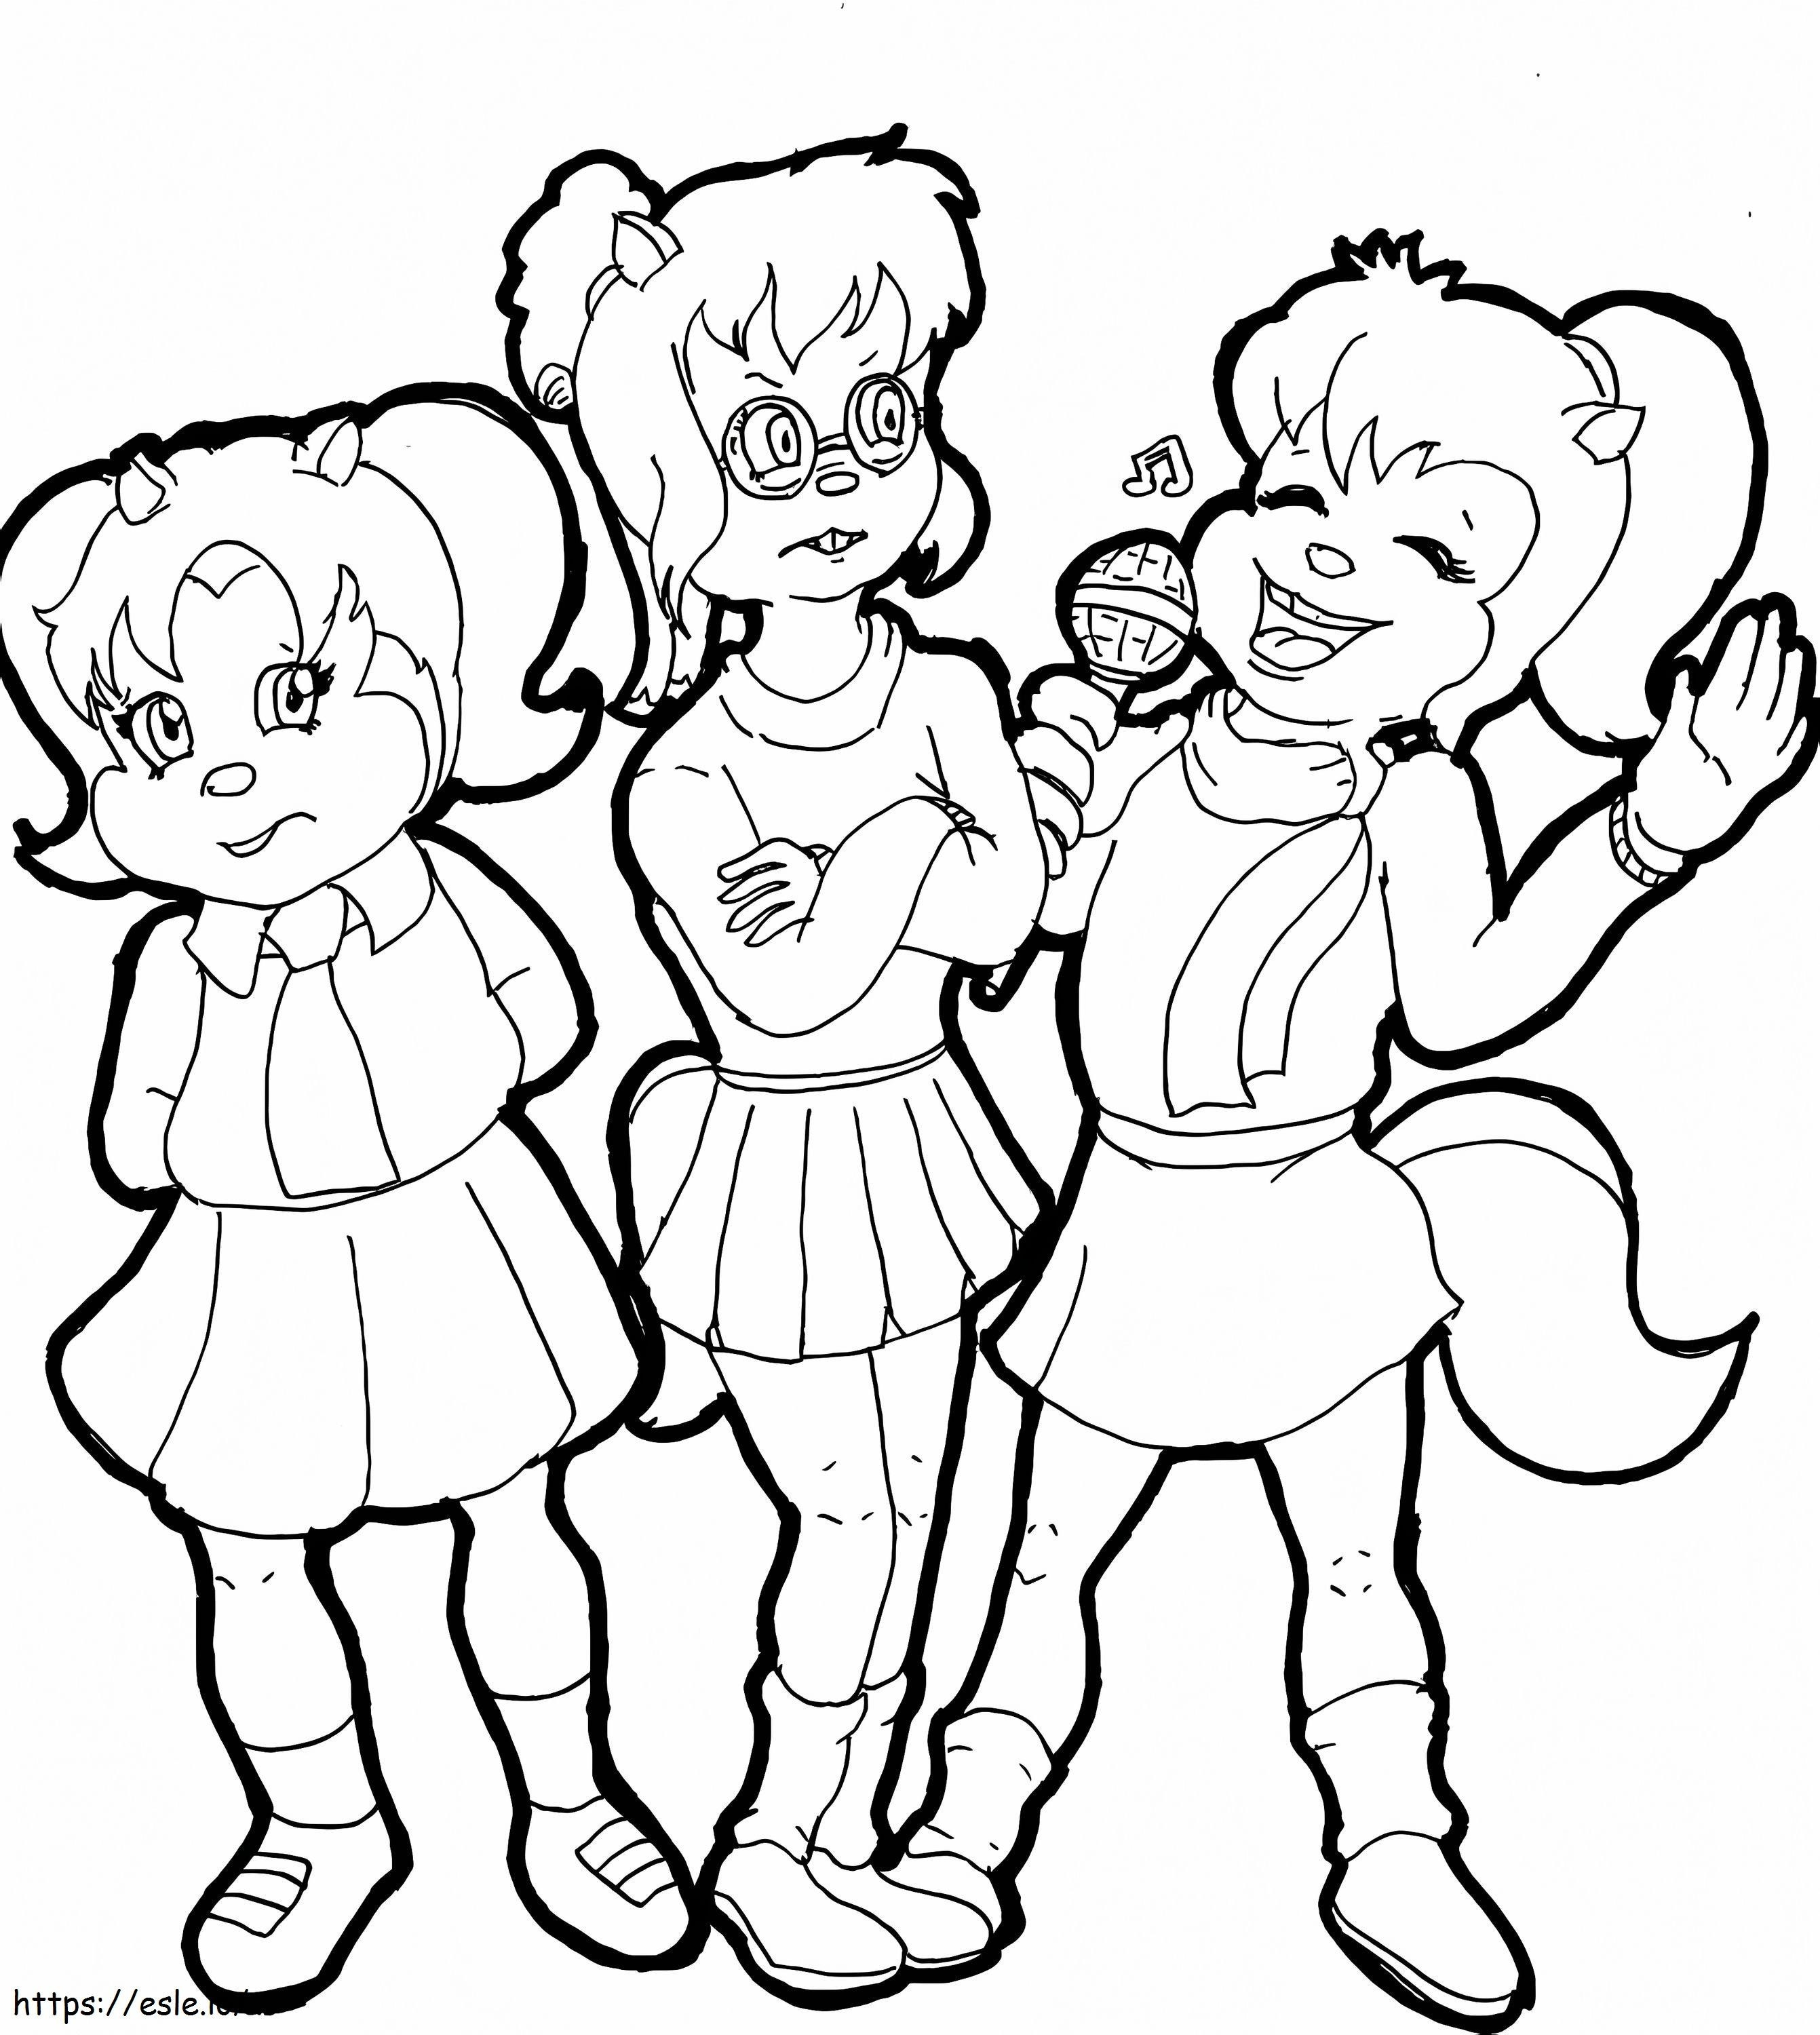 Fun Chipettes coloring page